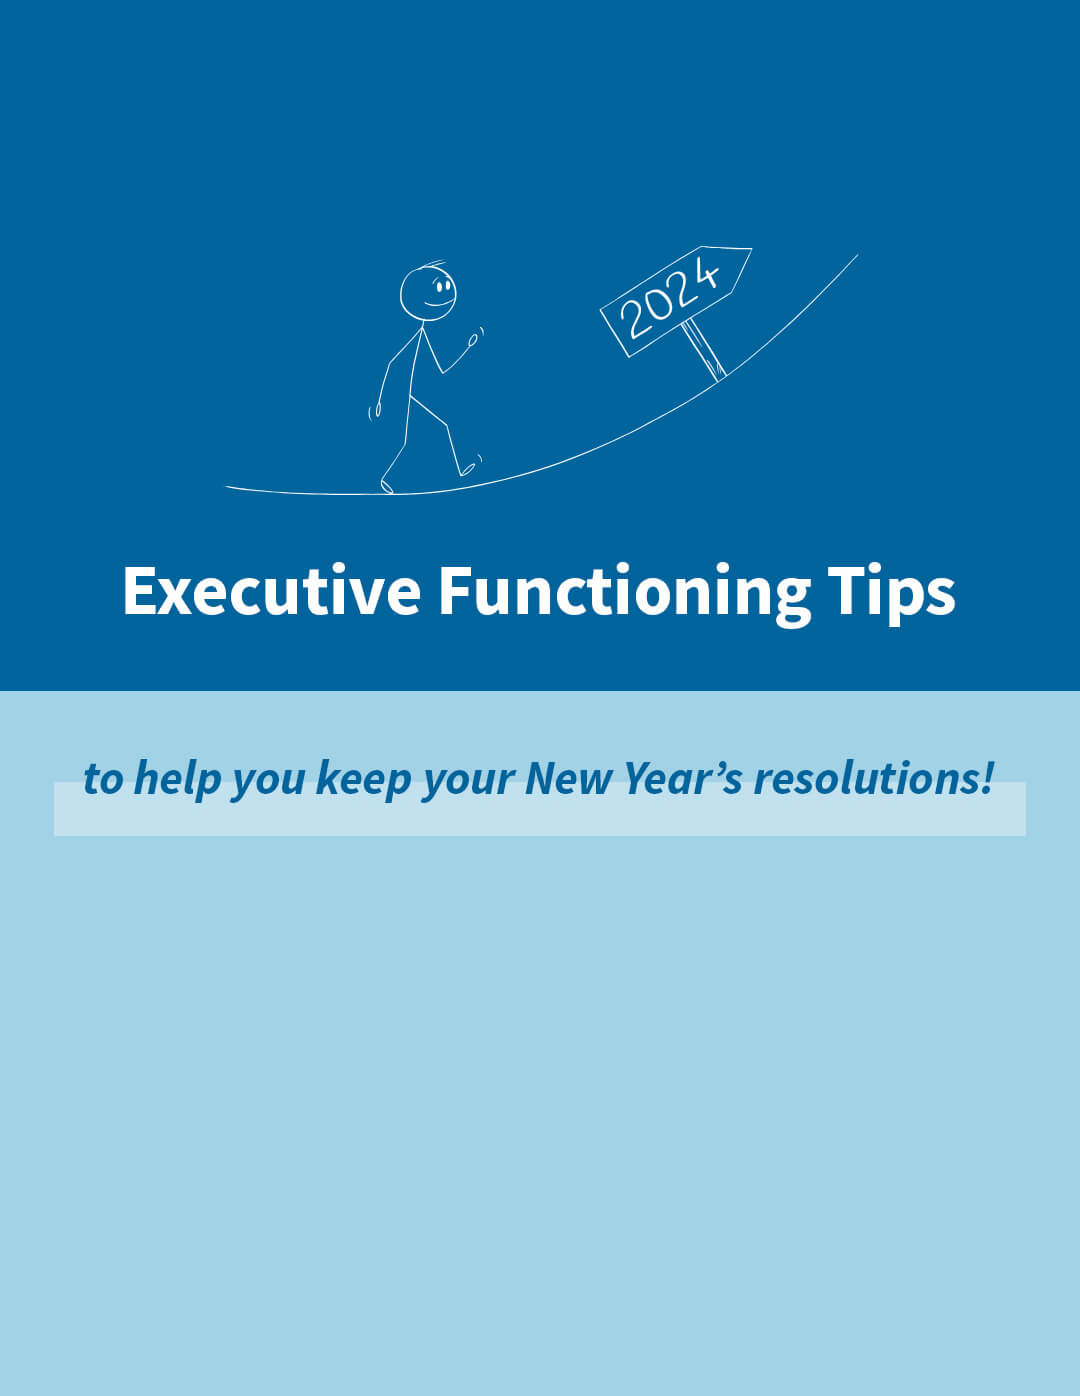 Executive Functioning Tips to help you keep your New Year's resolutions